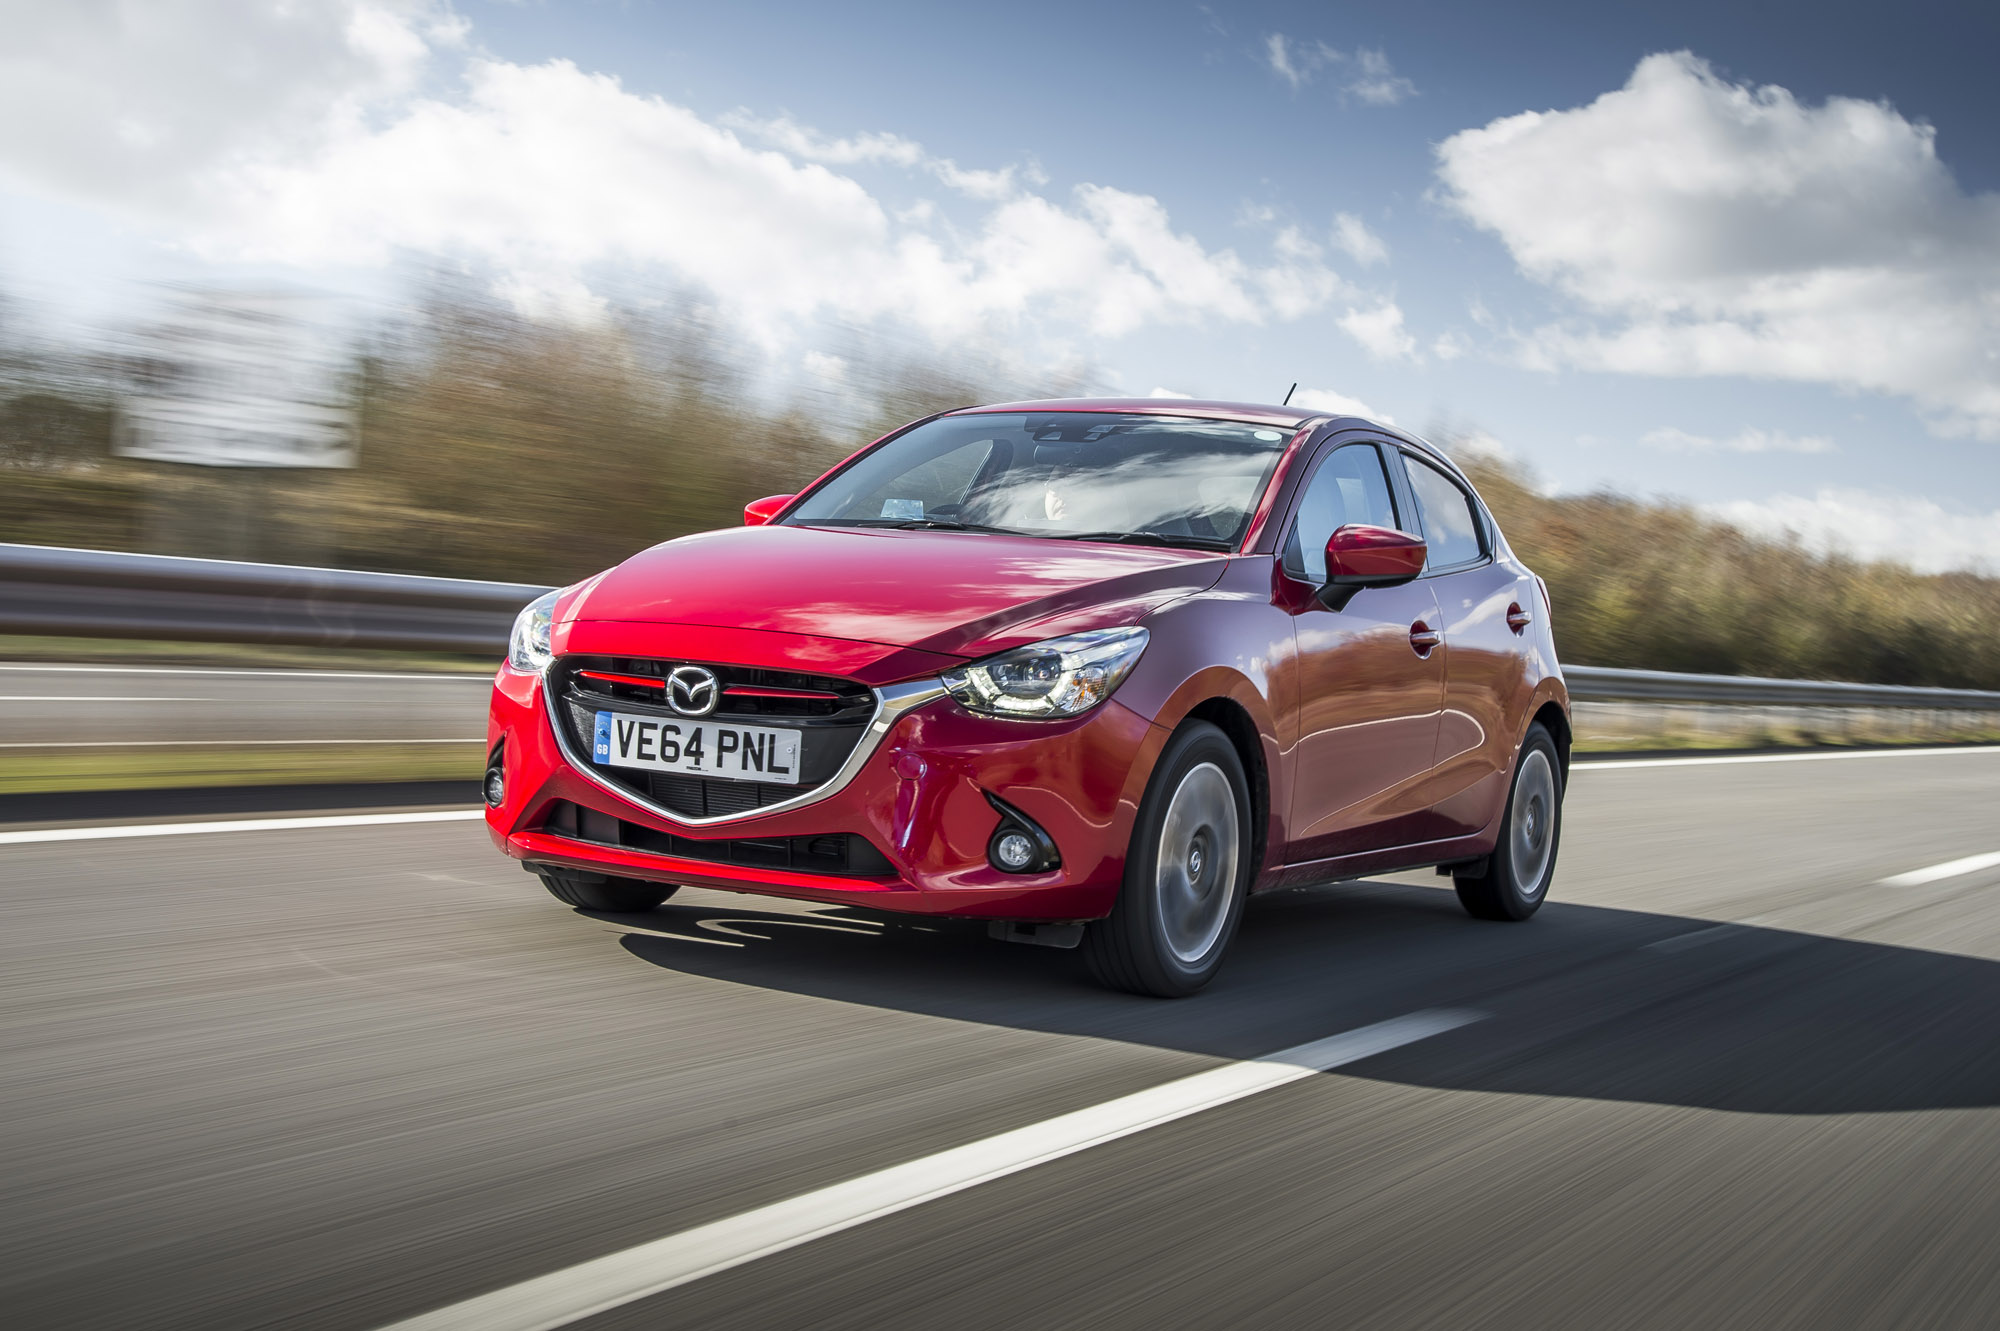 Mazda 2 review - prices, specs and 0-60 time